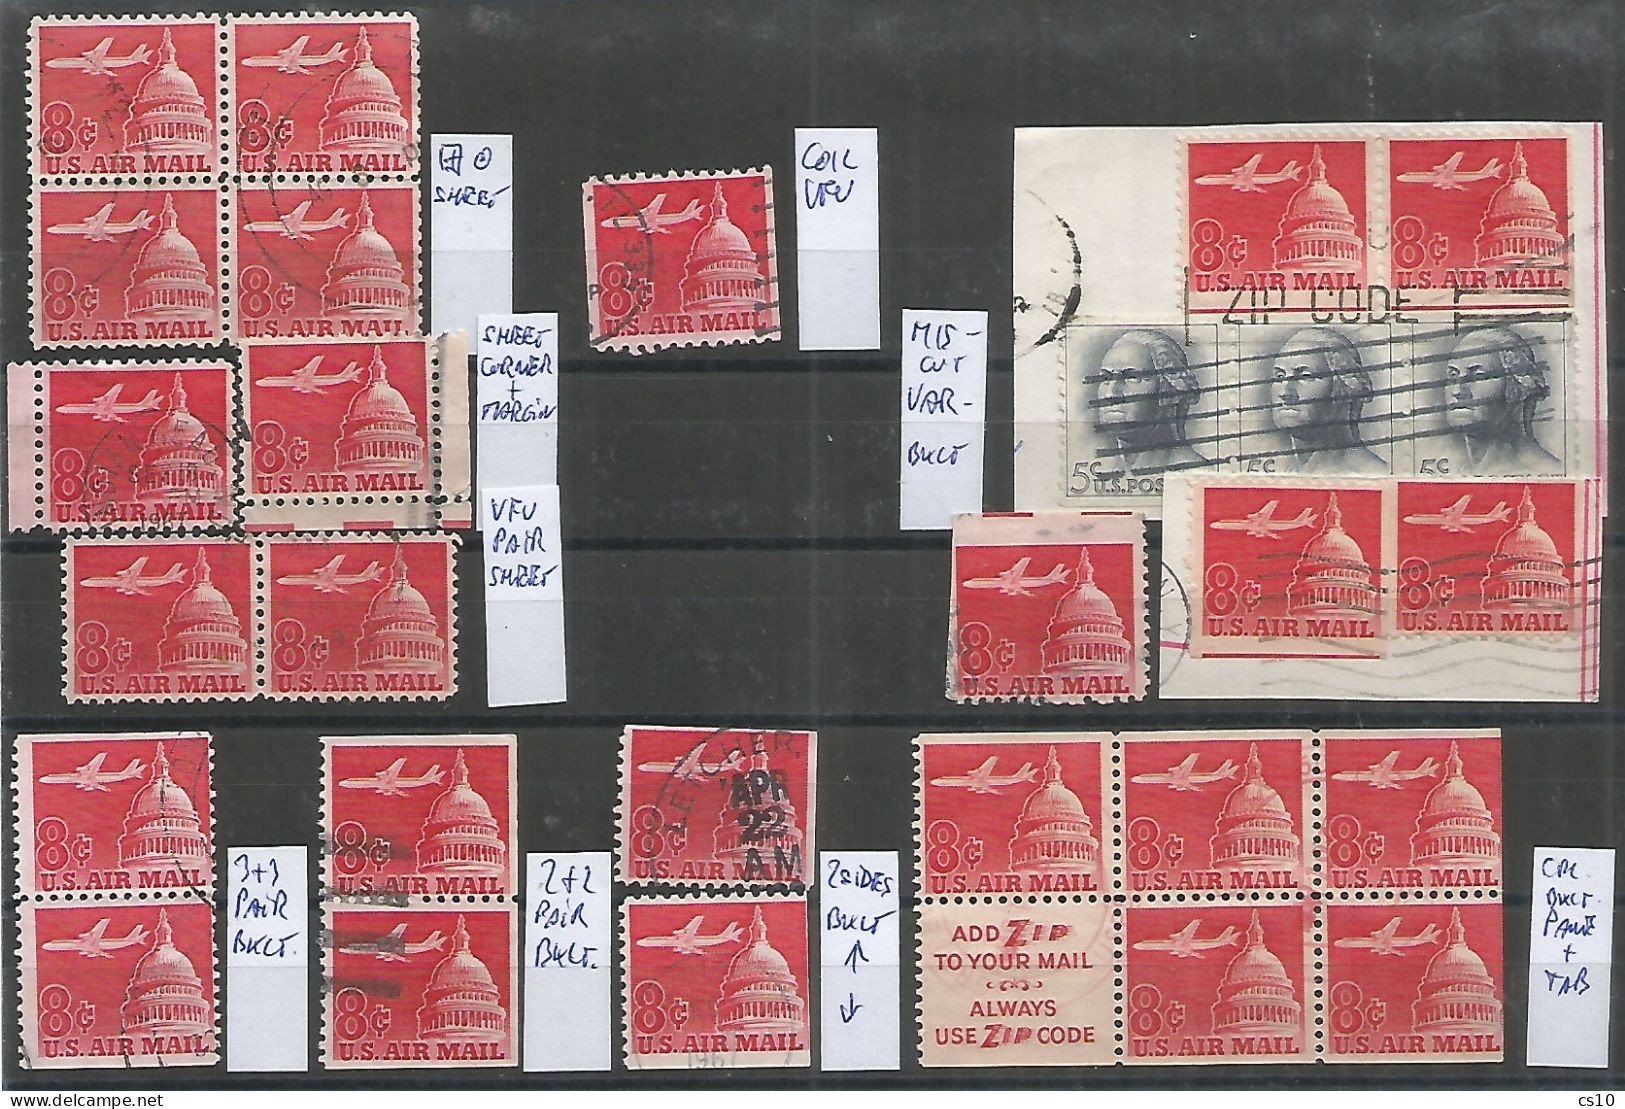 USA Airmail 1962 Jet & Capitol Dome SC# C64+65 Cpl Issue BL4 Sheet Coil Booklet Pane Pairs & Singles + Small Variety - 3a. 1961-… Usados